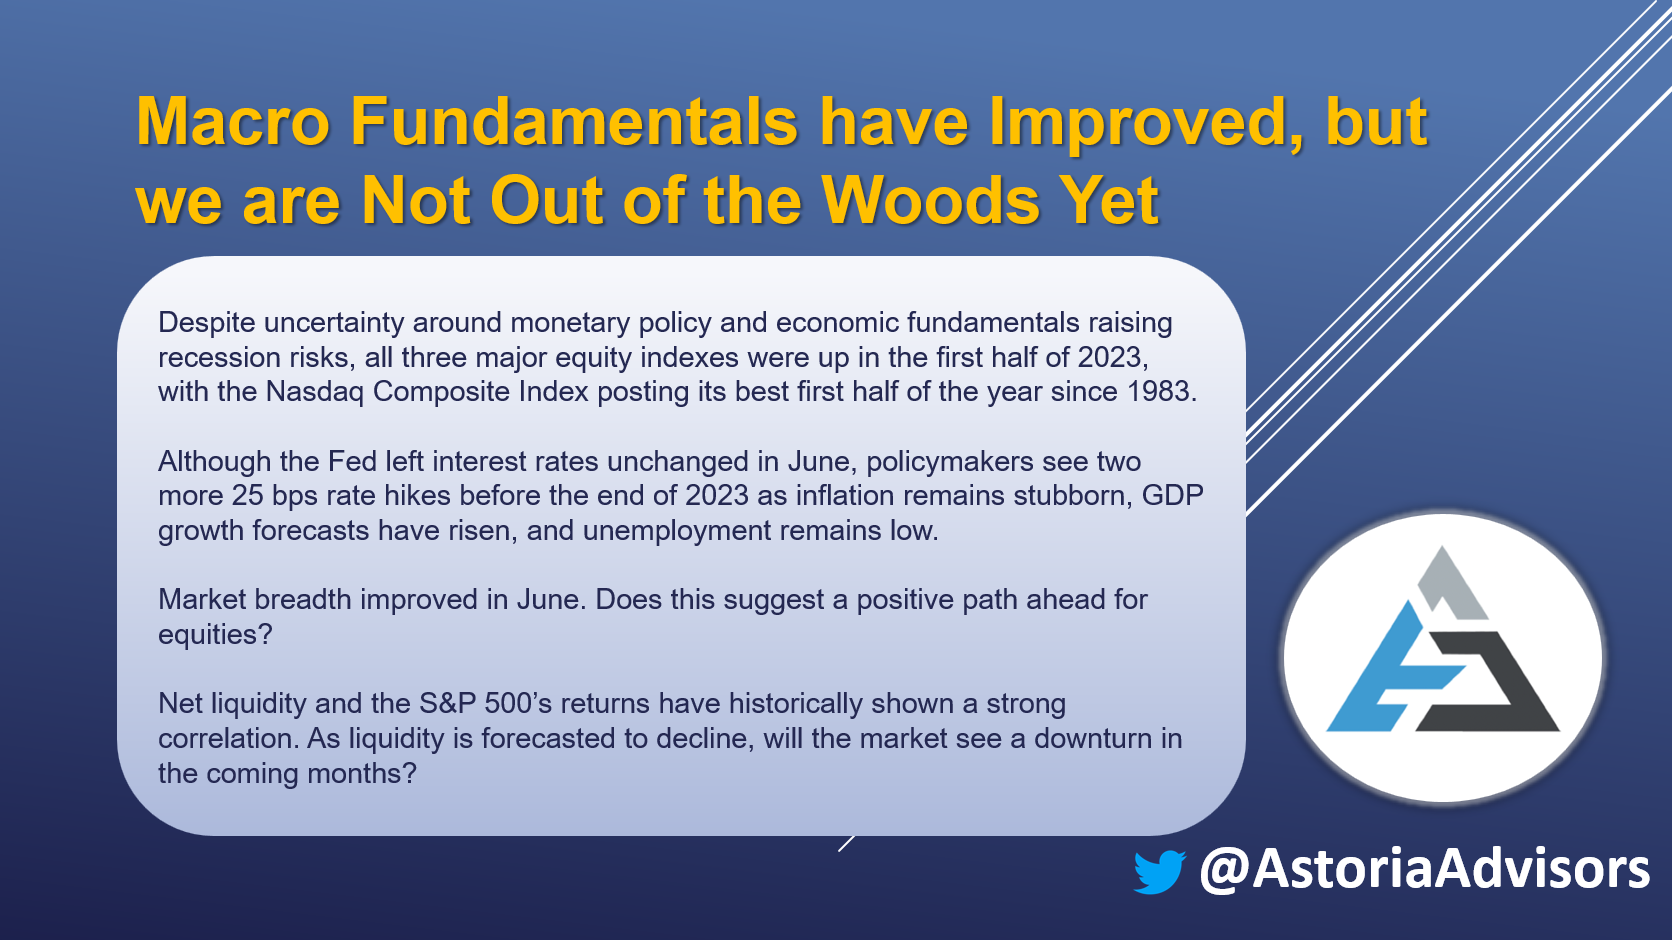 Macro Fundamentals have Improved, but we are Not Out of the Woods Yet